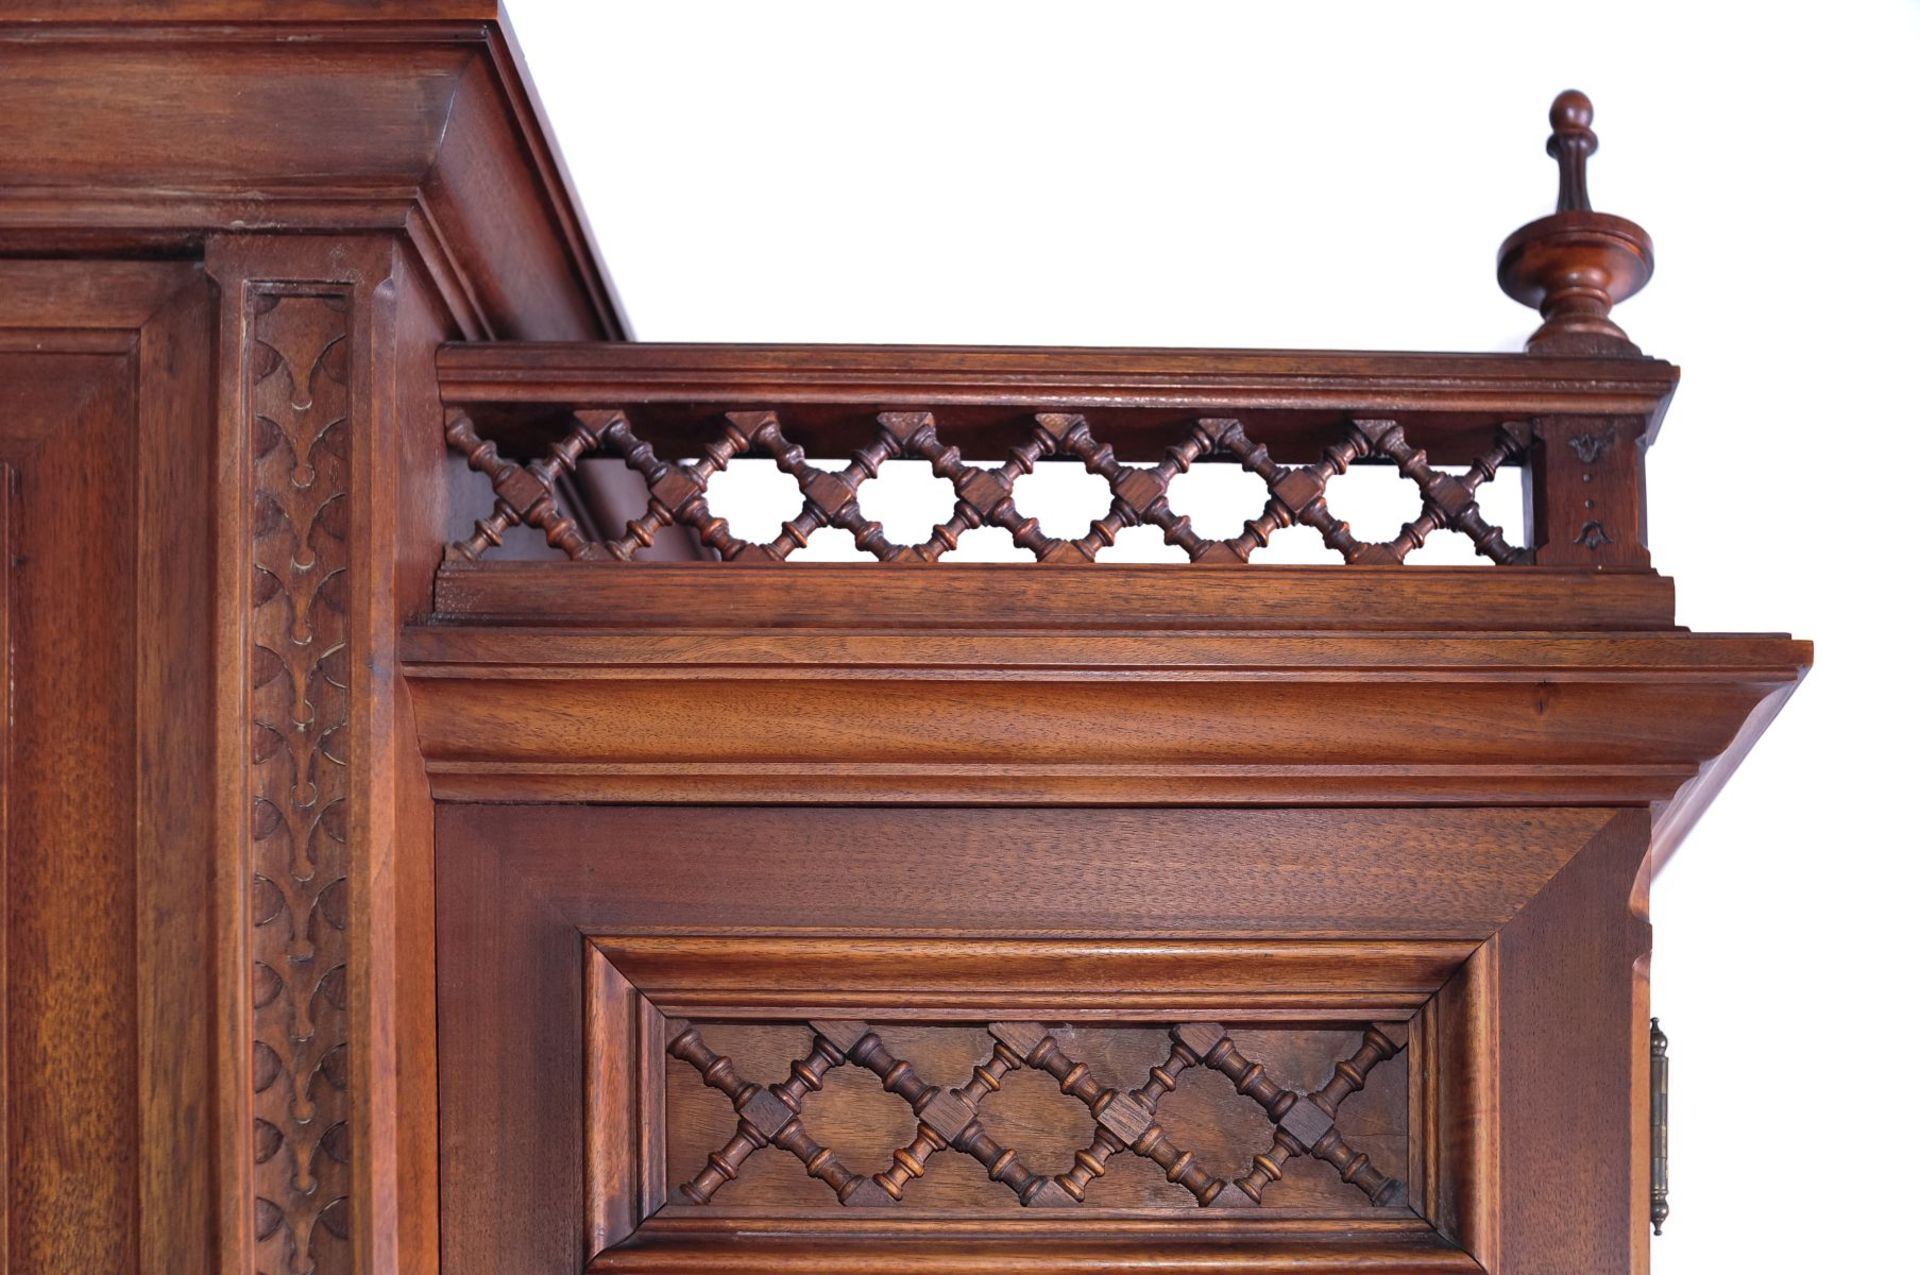 Magnificent salon cabinet in oriental style - Image 6 of 6